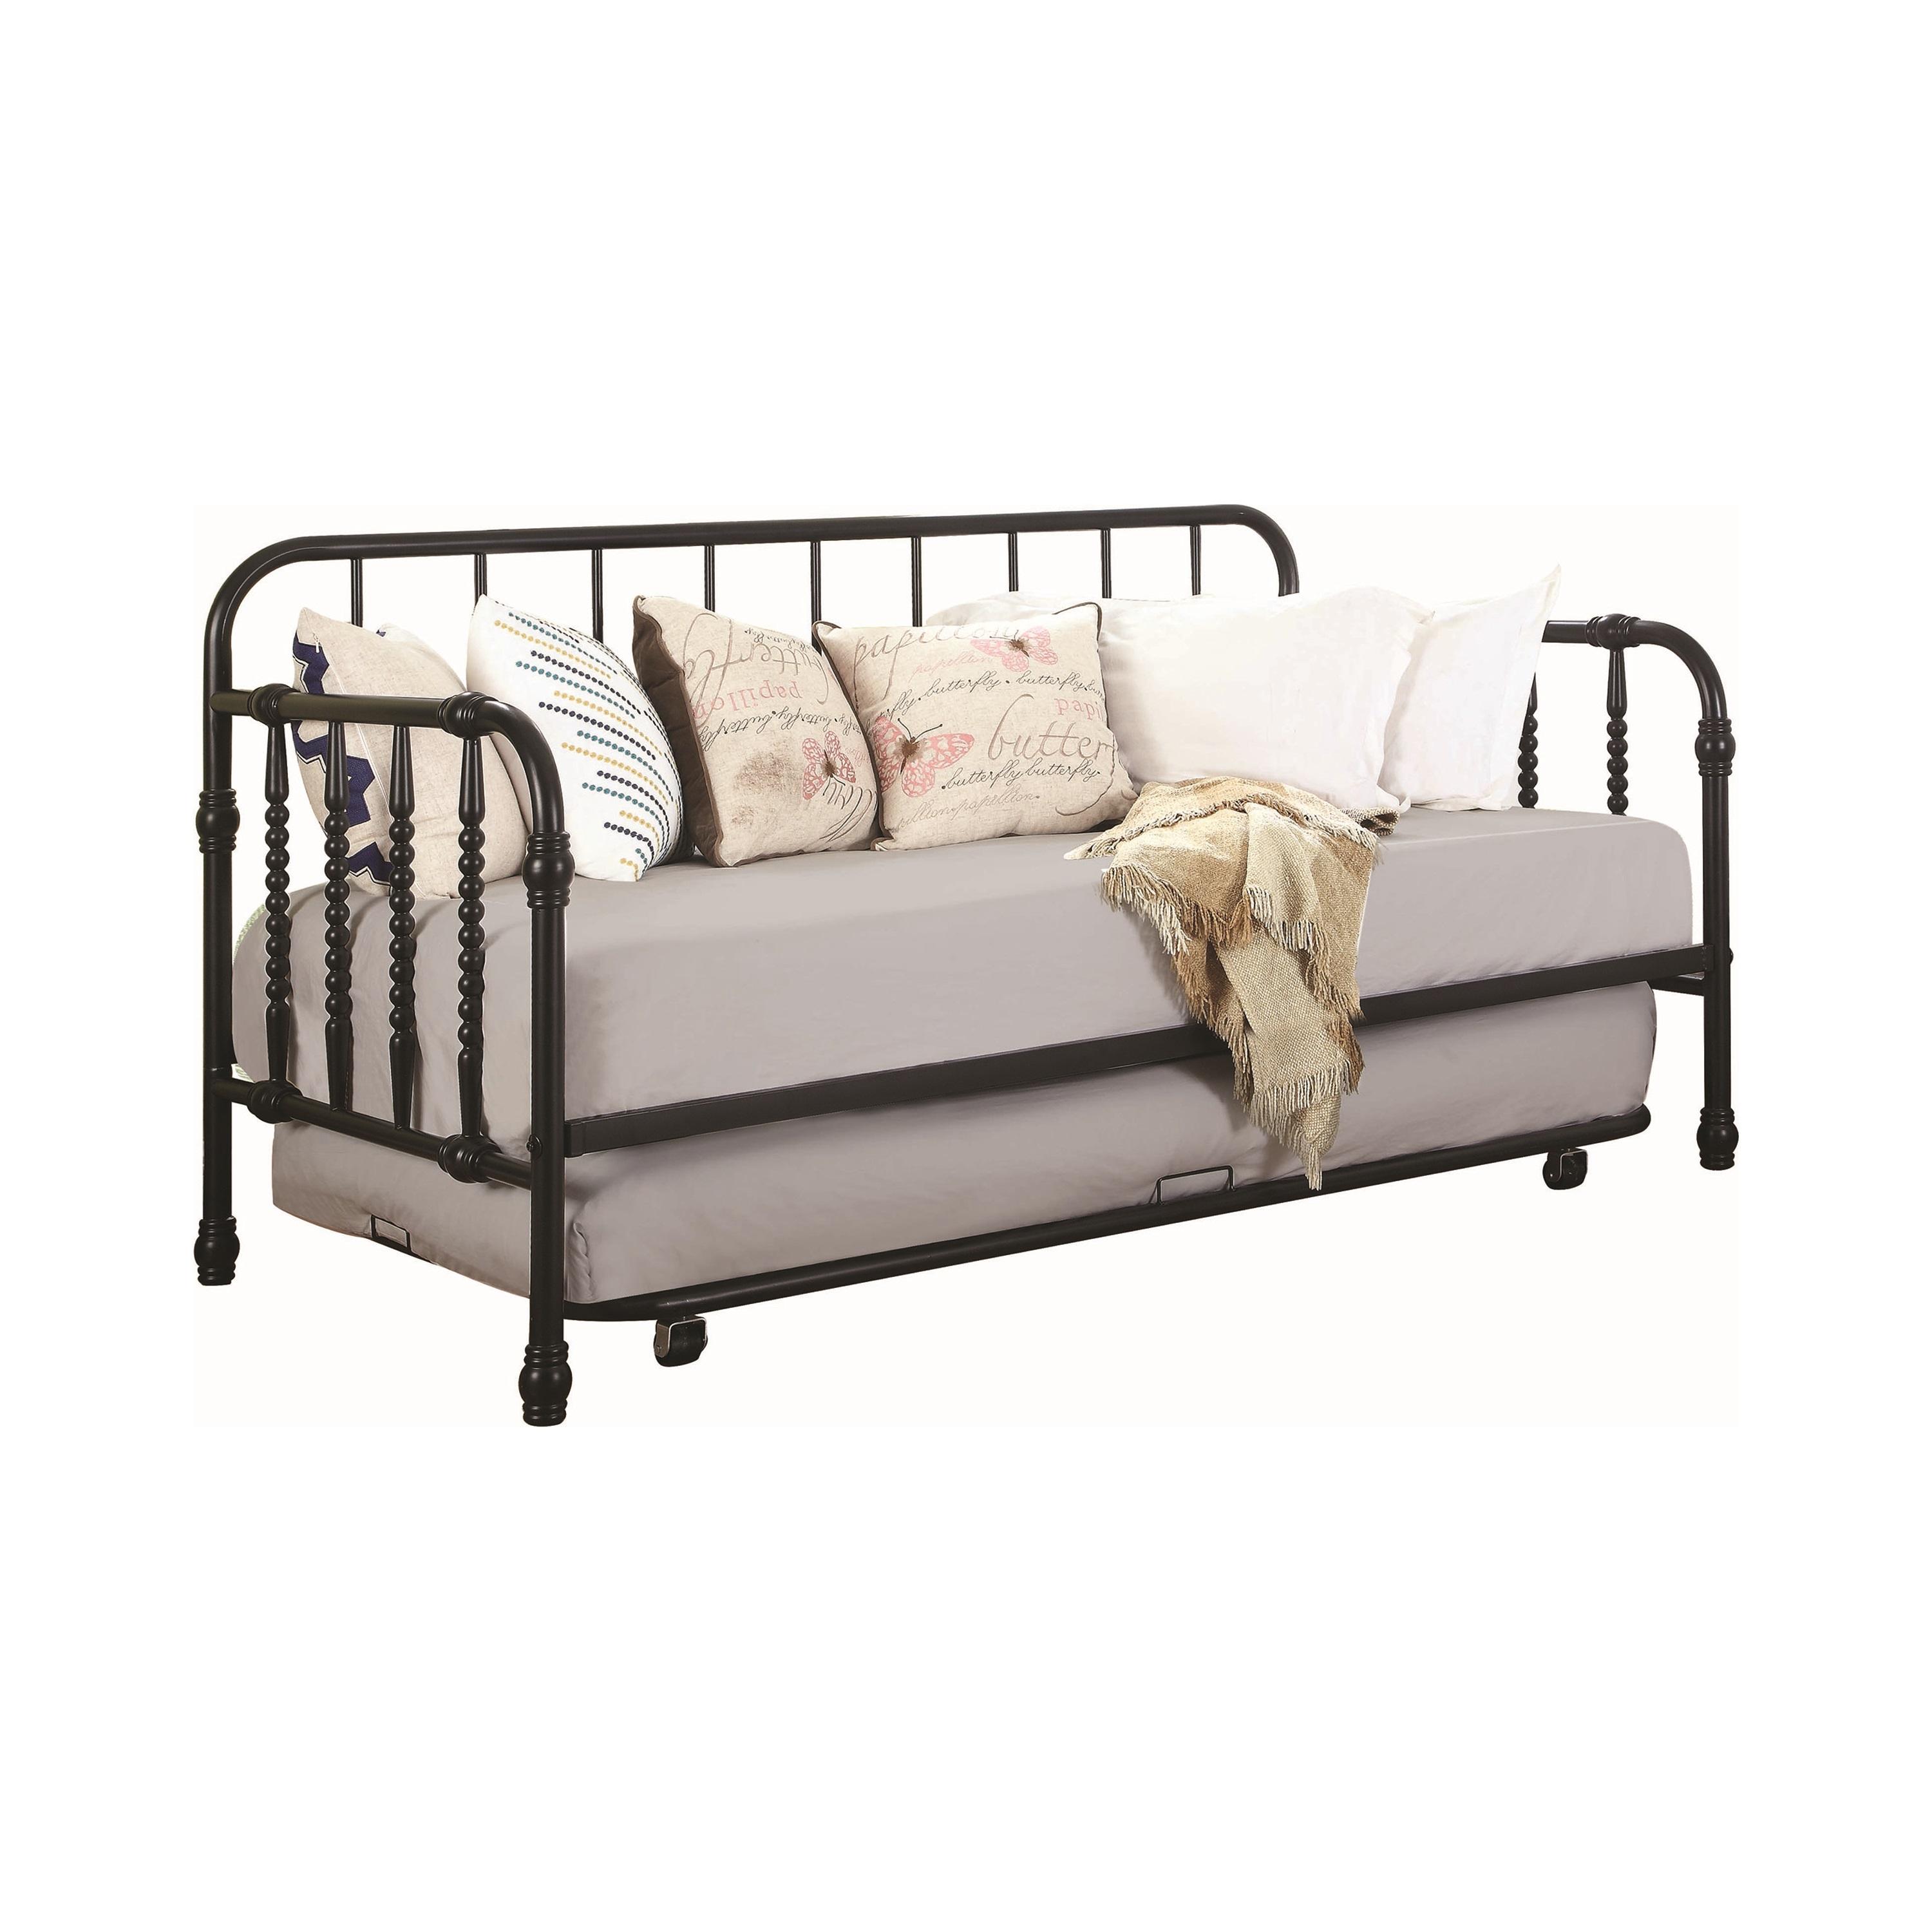 Coaster 300765 Daybed w/Trundle